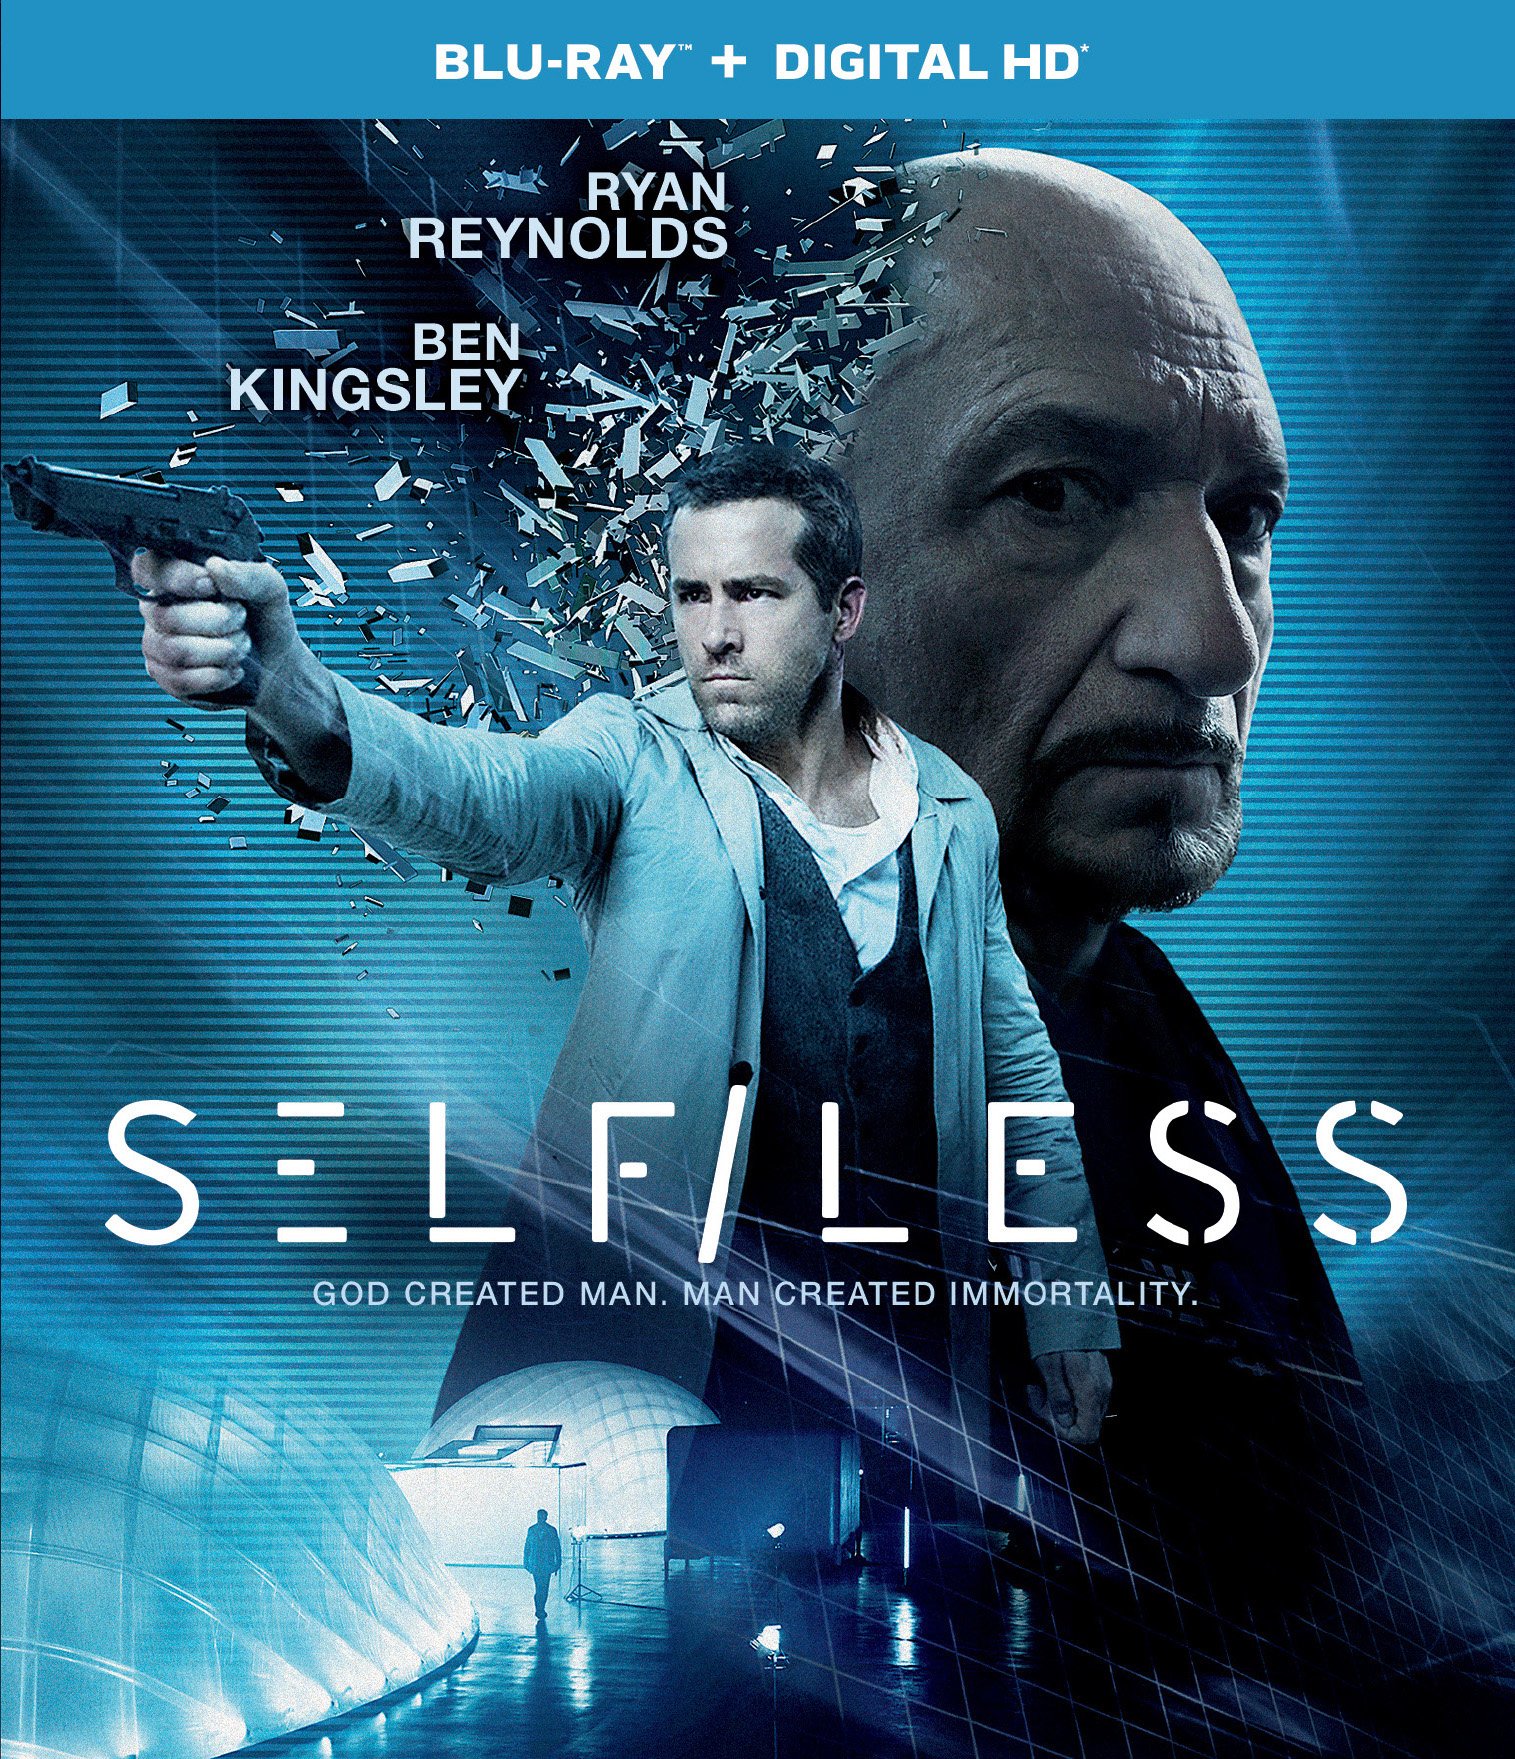 Self/Less Blu-ray Review